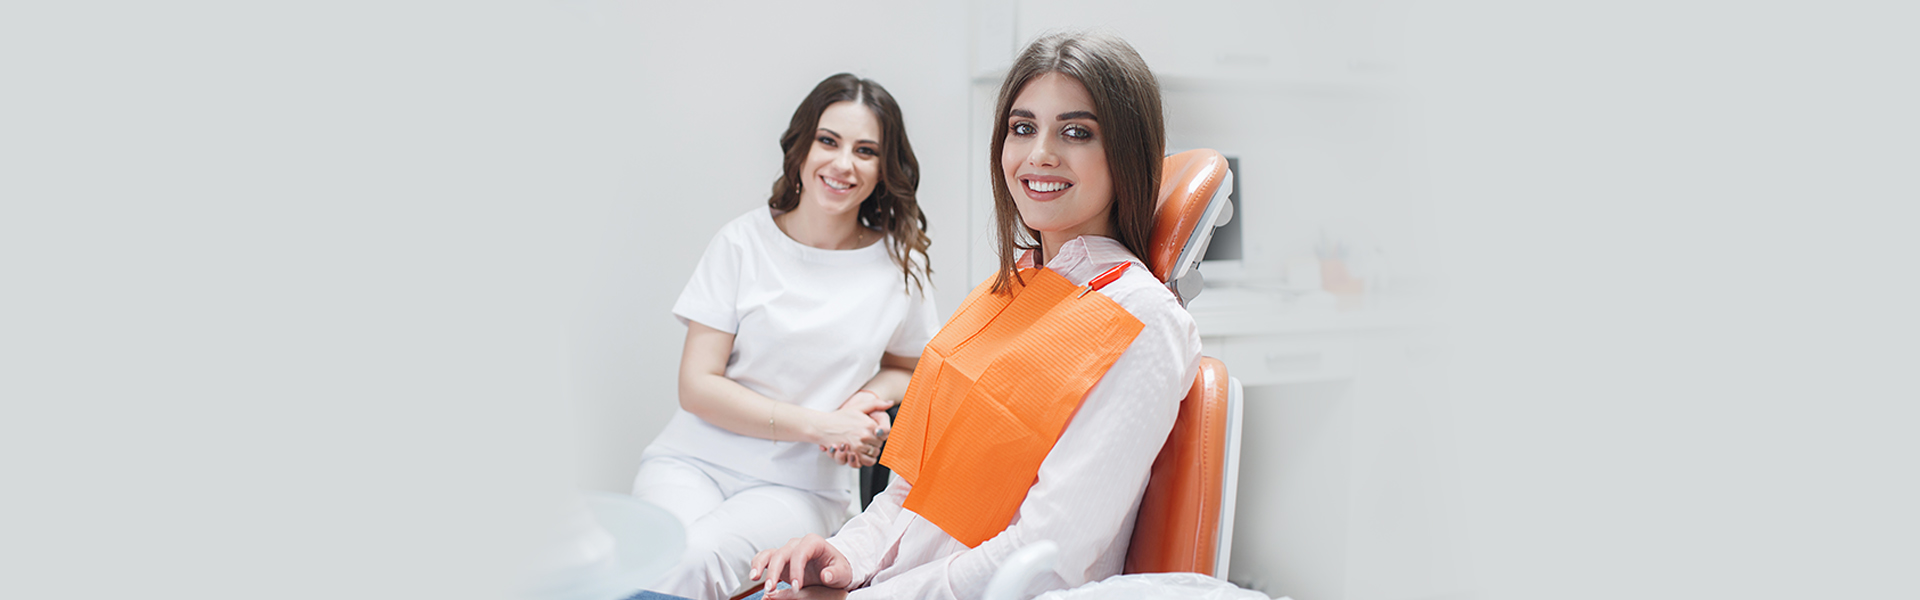 Is Oral Surgery Safe and How?